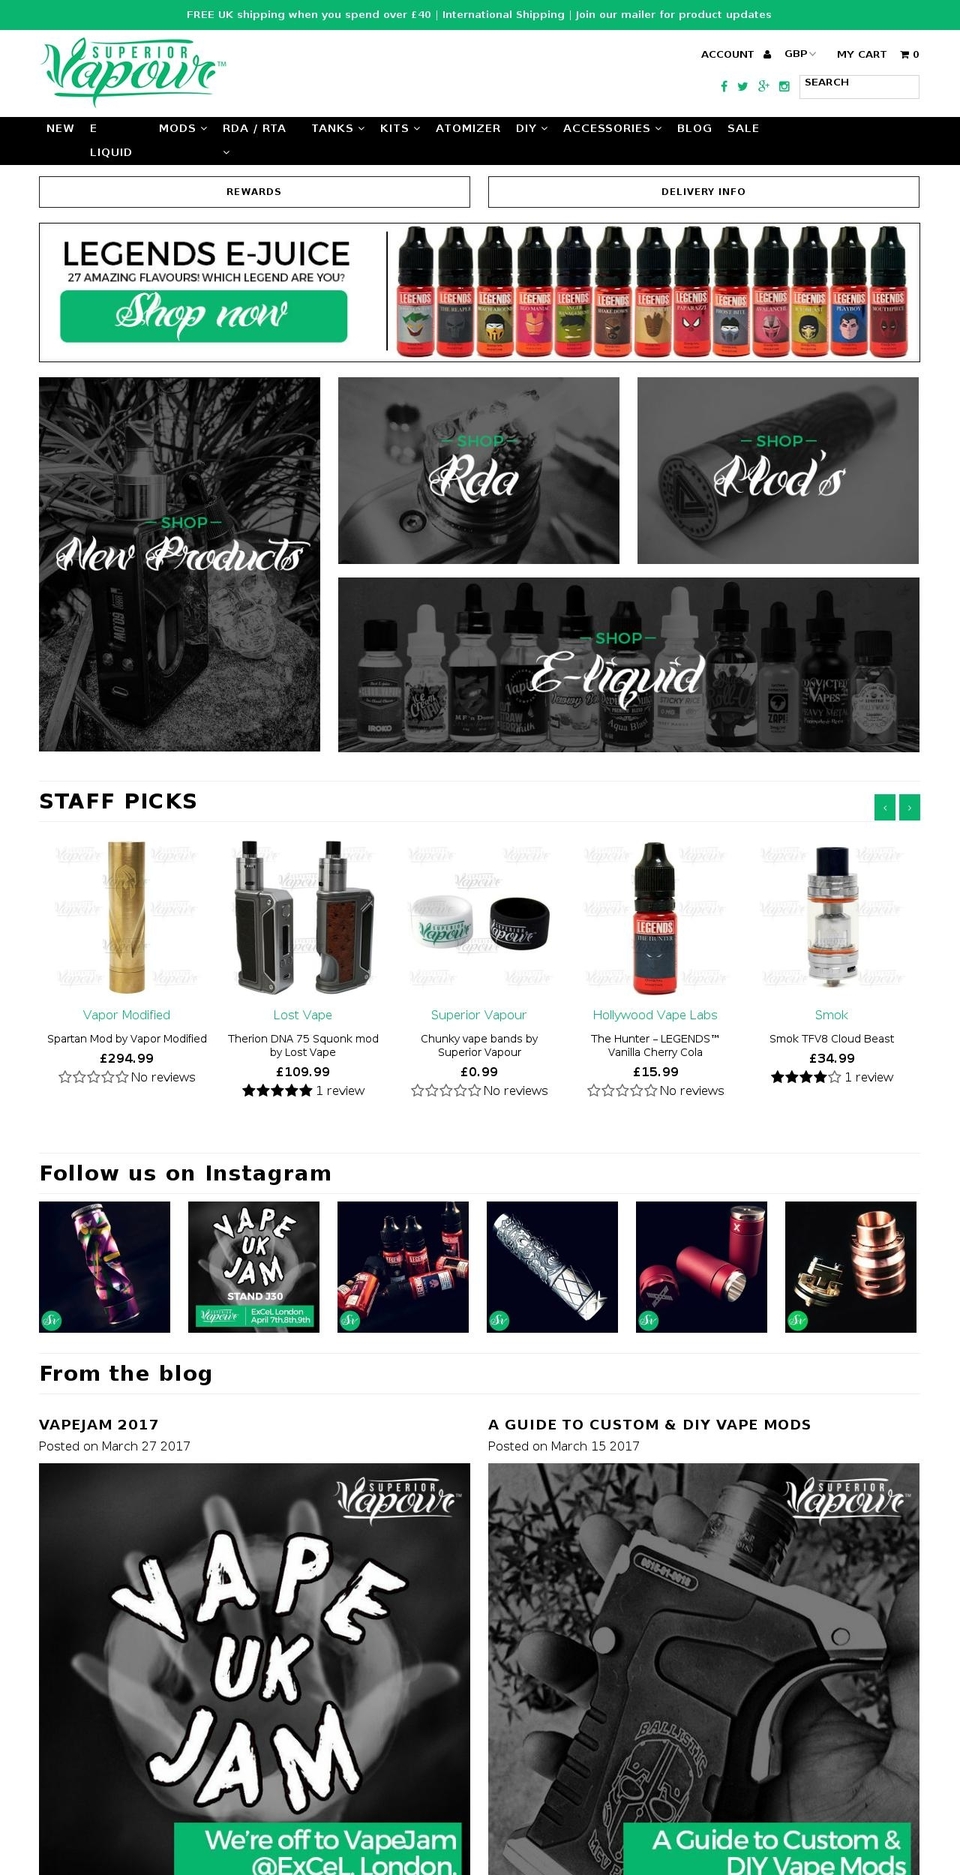 Providence Shopify theme site example superiorvapour.com